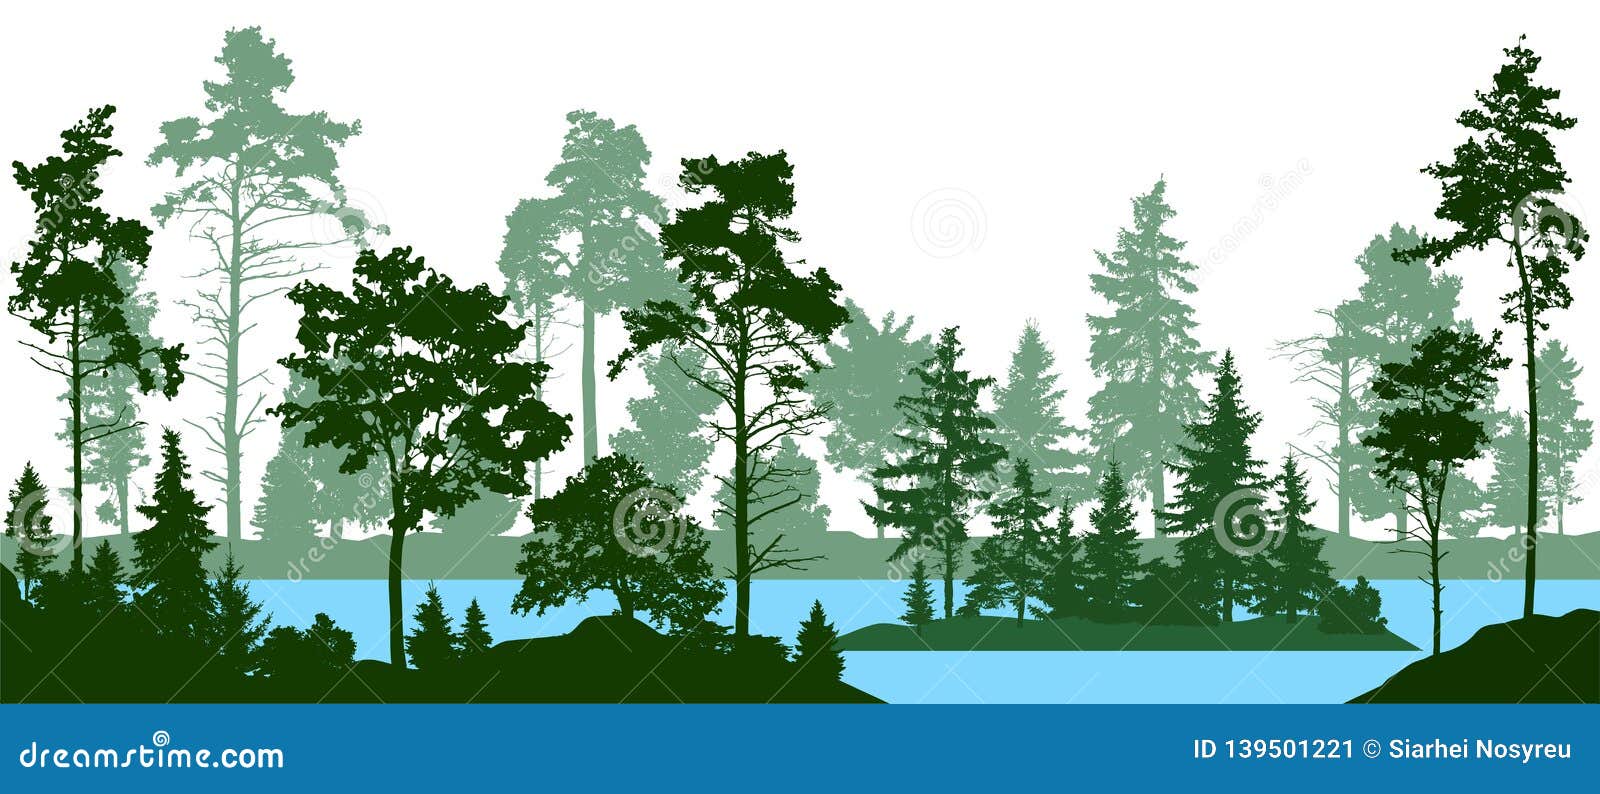 evergreen coniferous forest with pines, fir trees, christmas tree, cedar, scotch fir. forest silhouette trees. lake river 